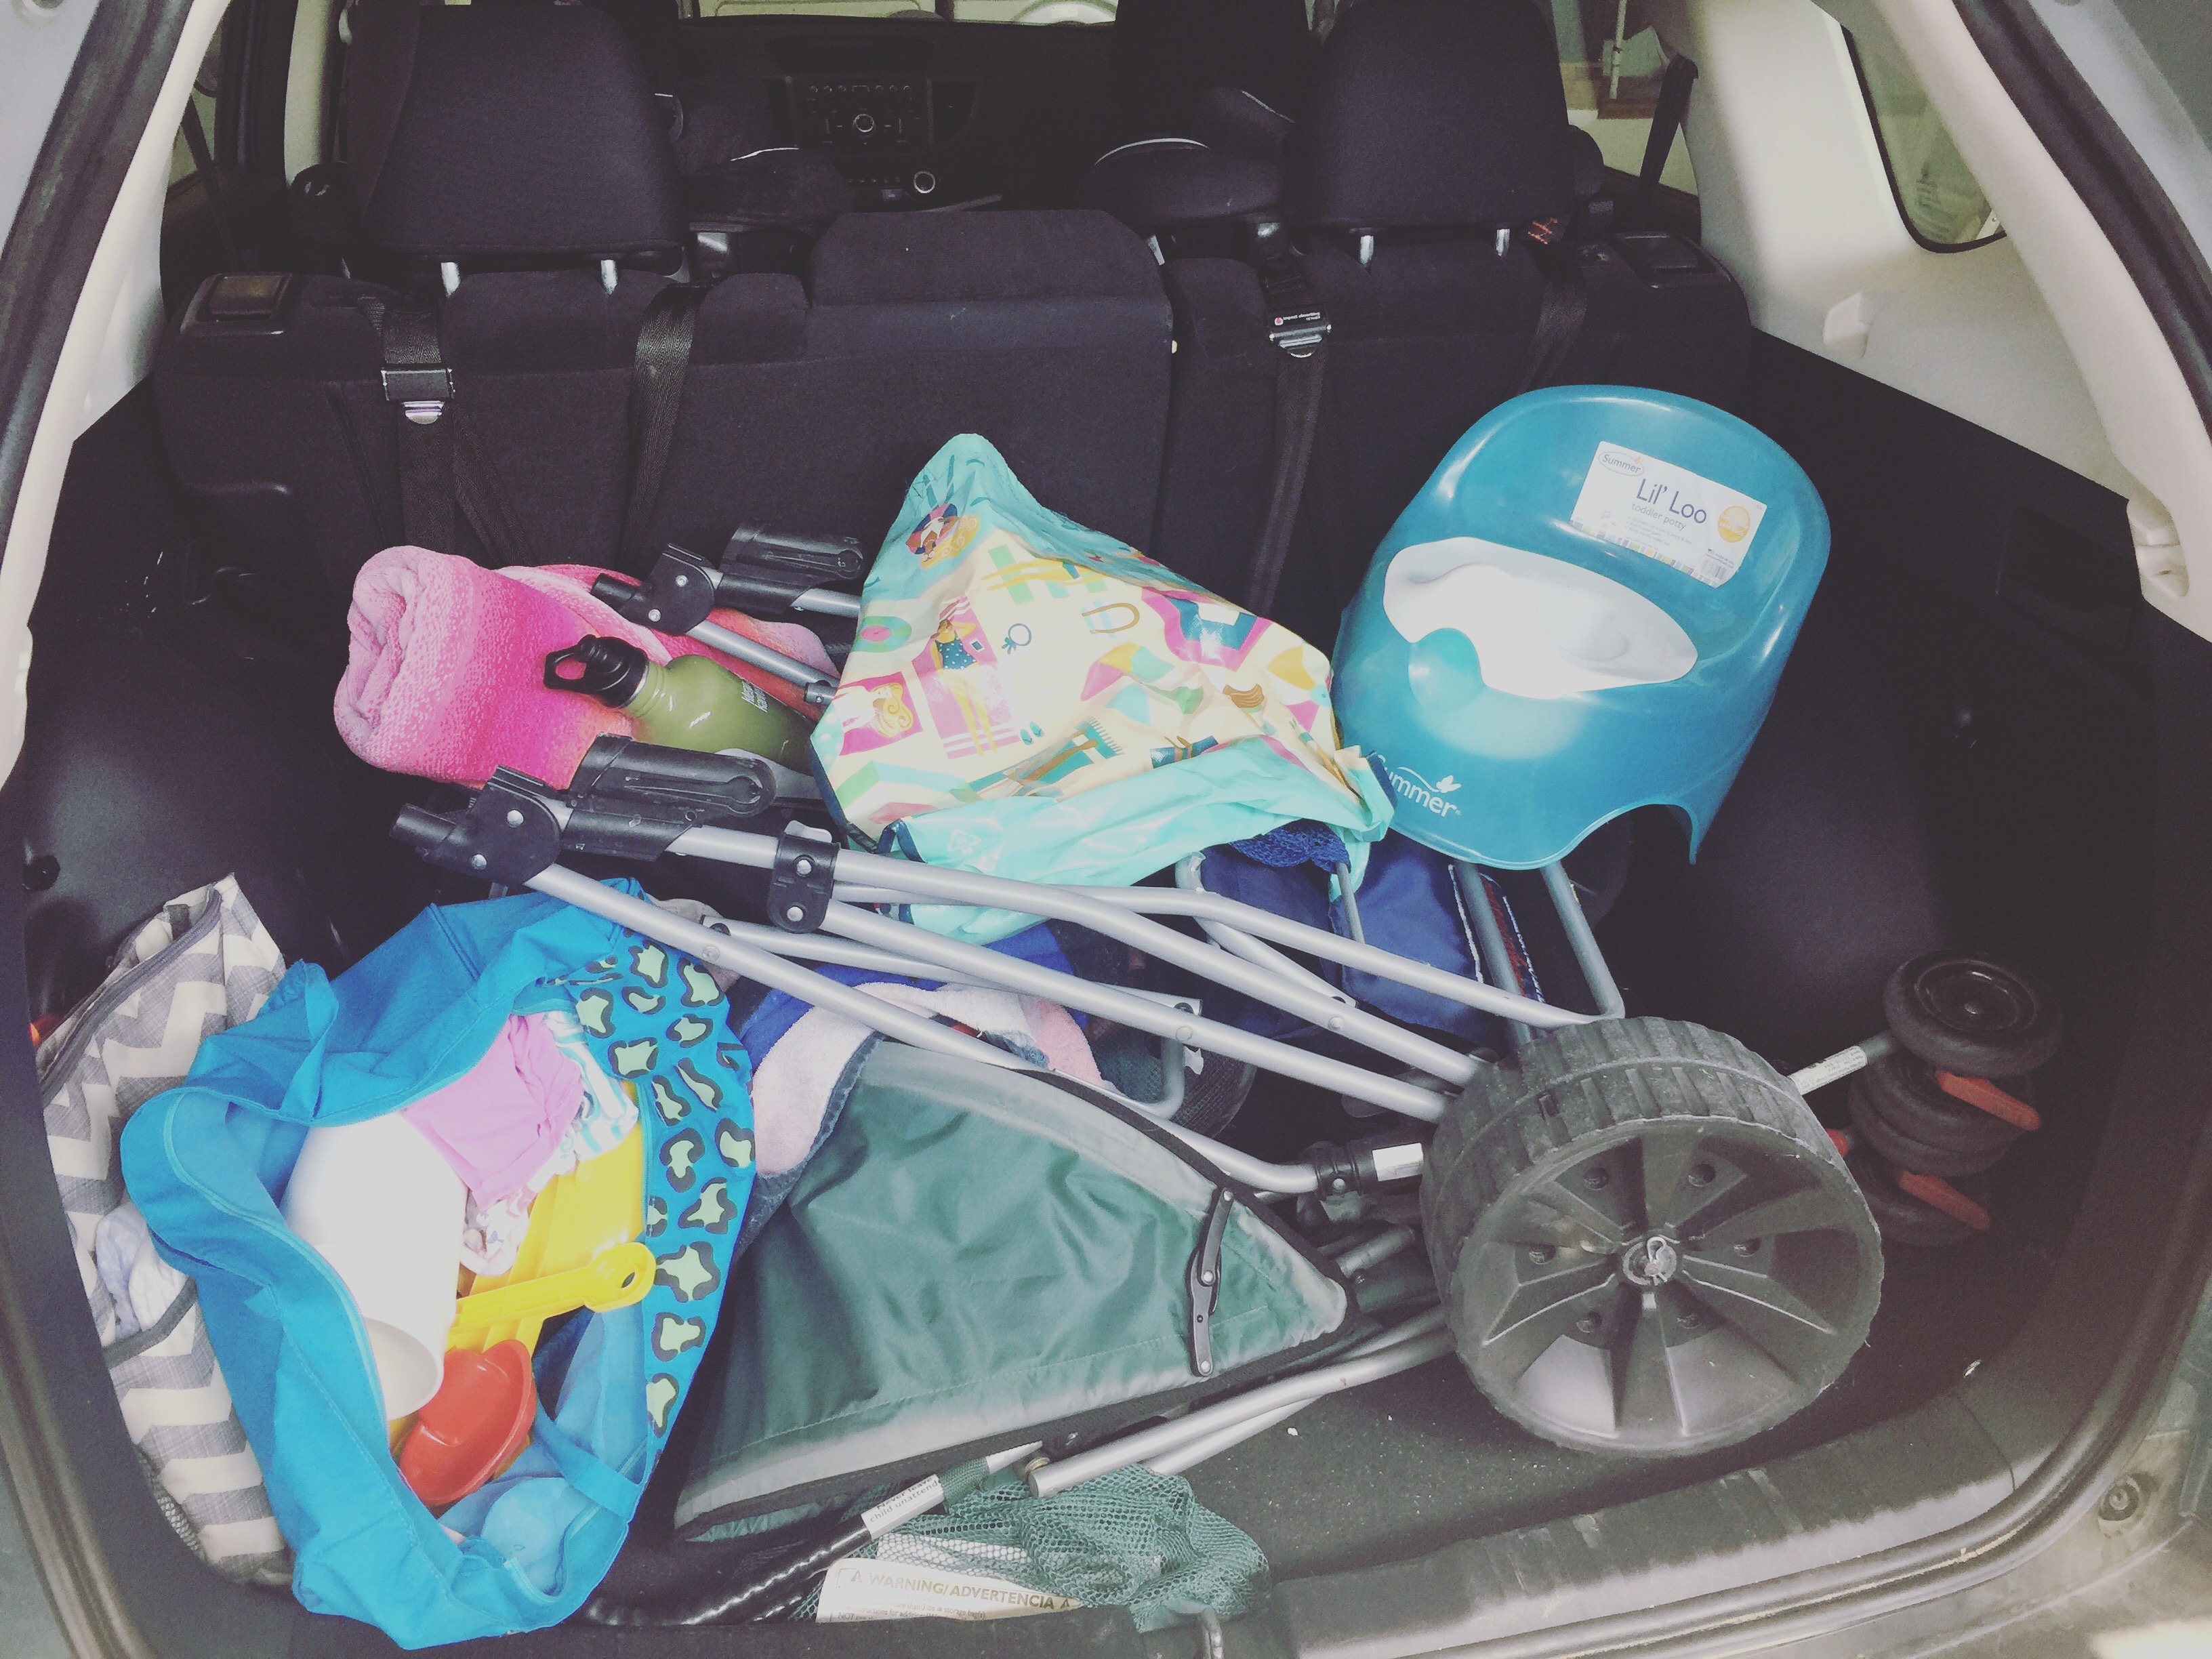 Packing the car for a beach trip with kids